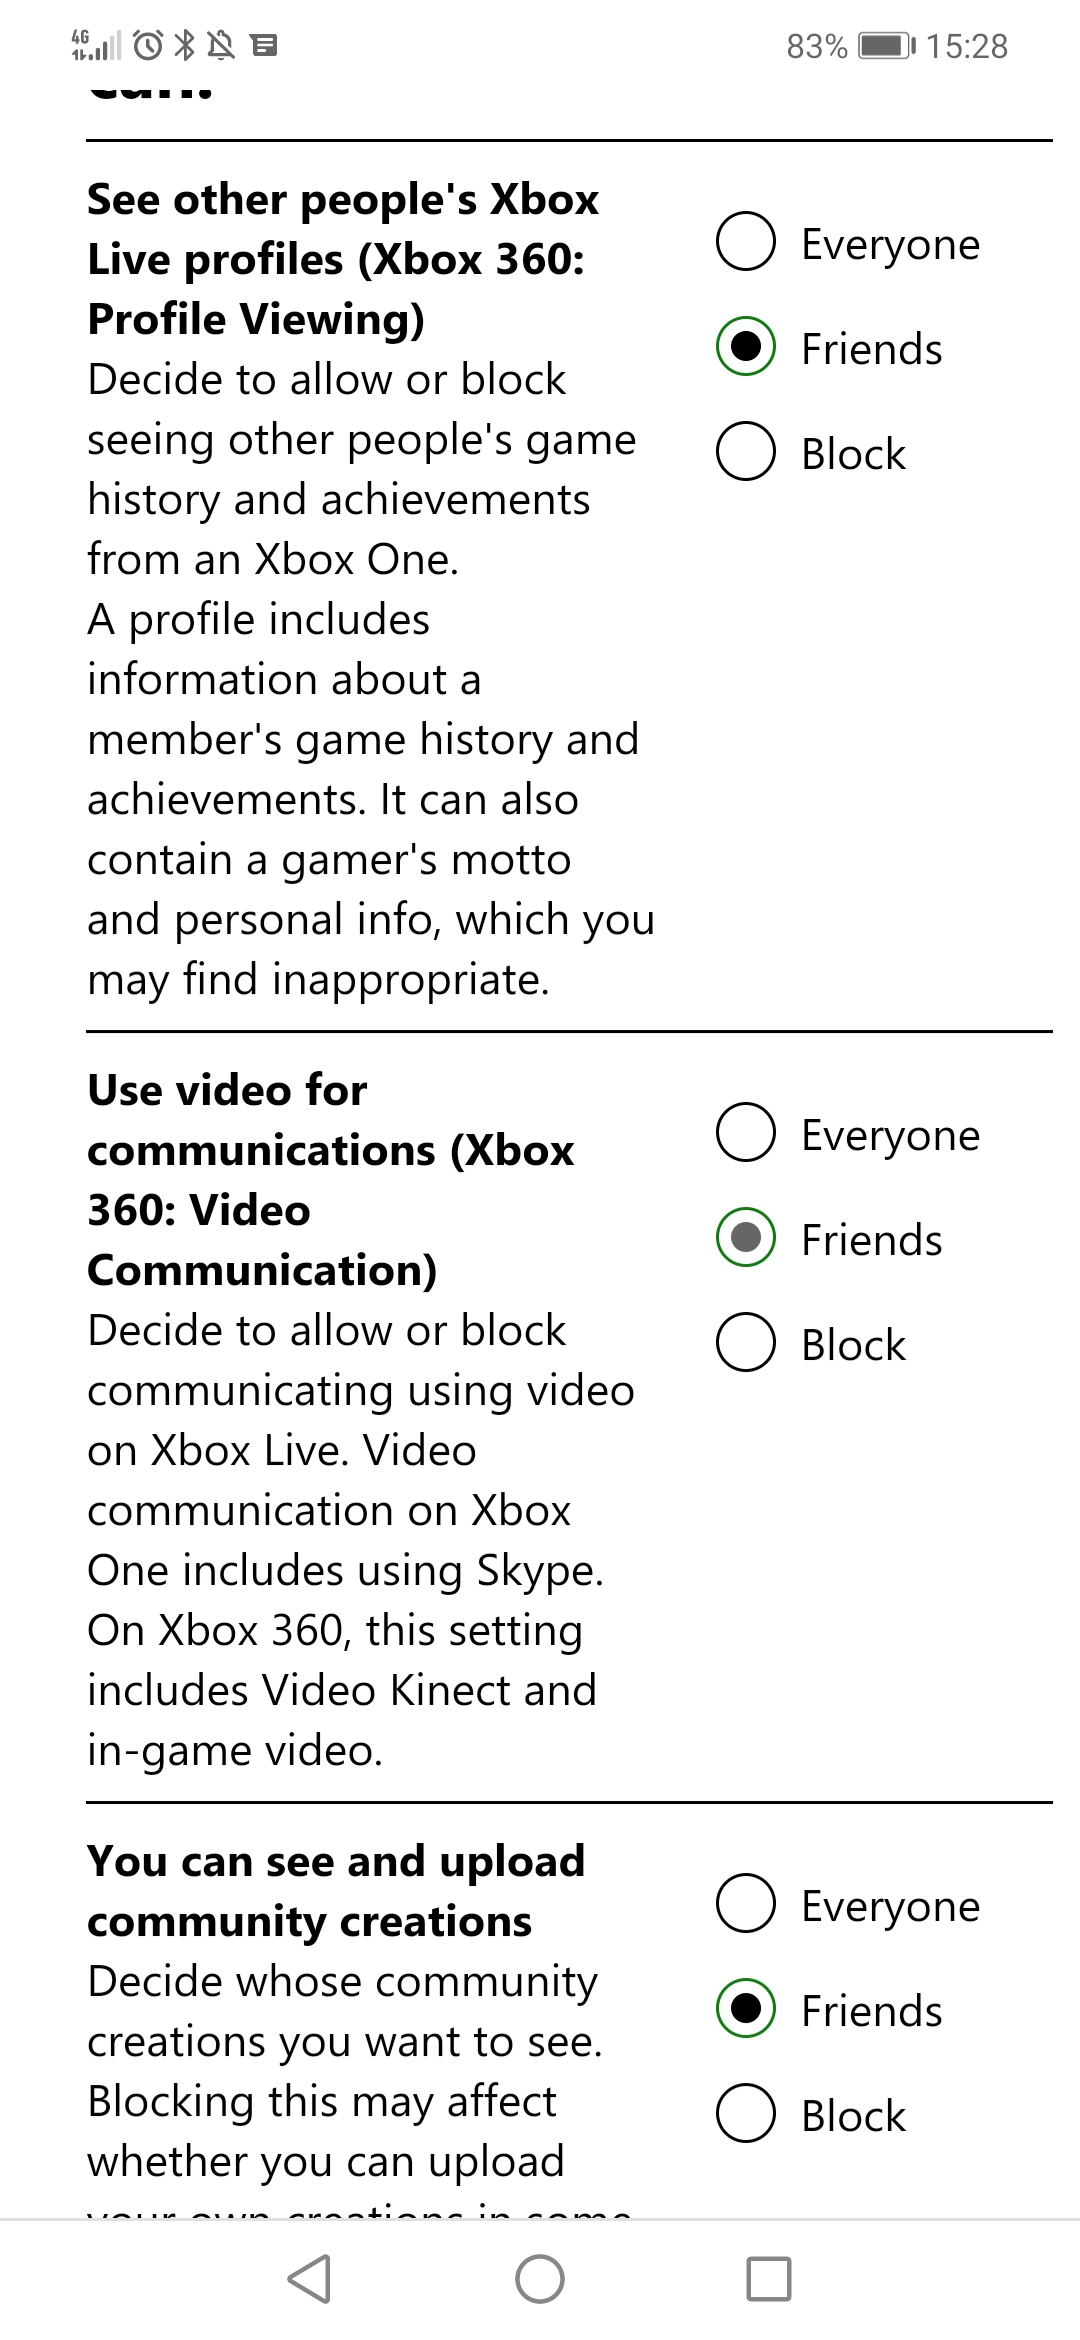 Roblox On Xbox One S Digital - roblox purchase history xbox